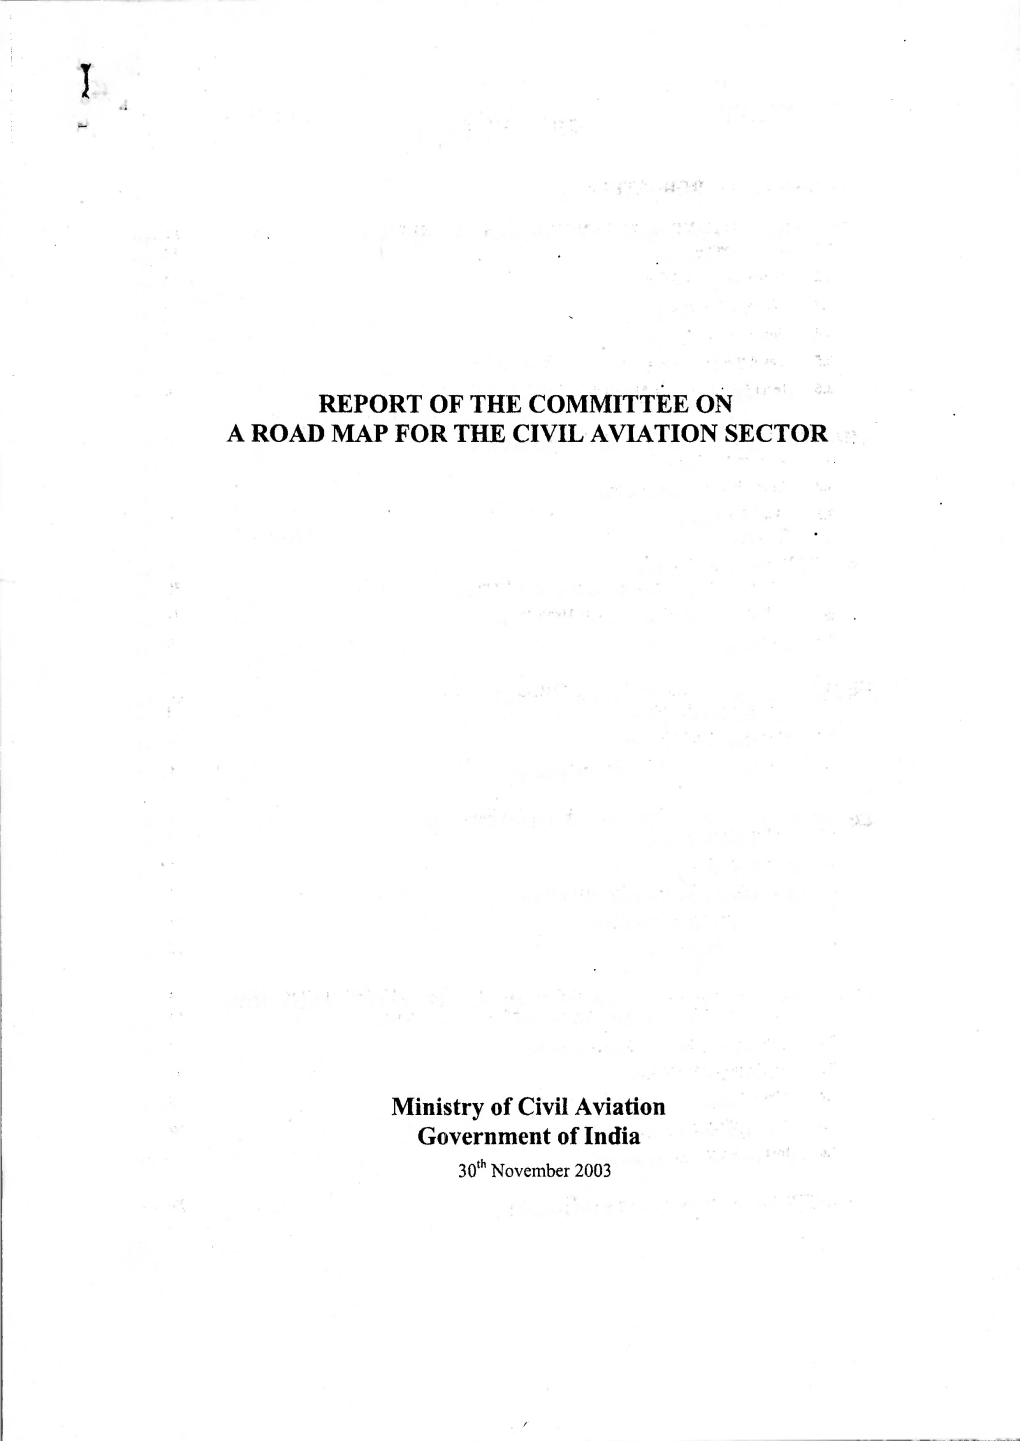 Report of the Committee on a Road Map for the Civil Aviation Sector